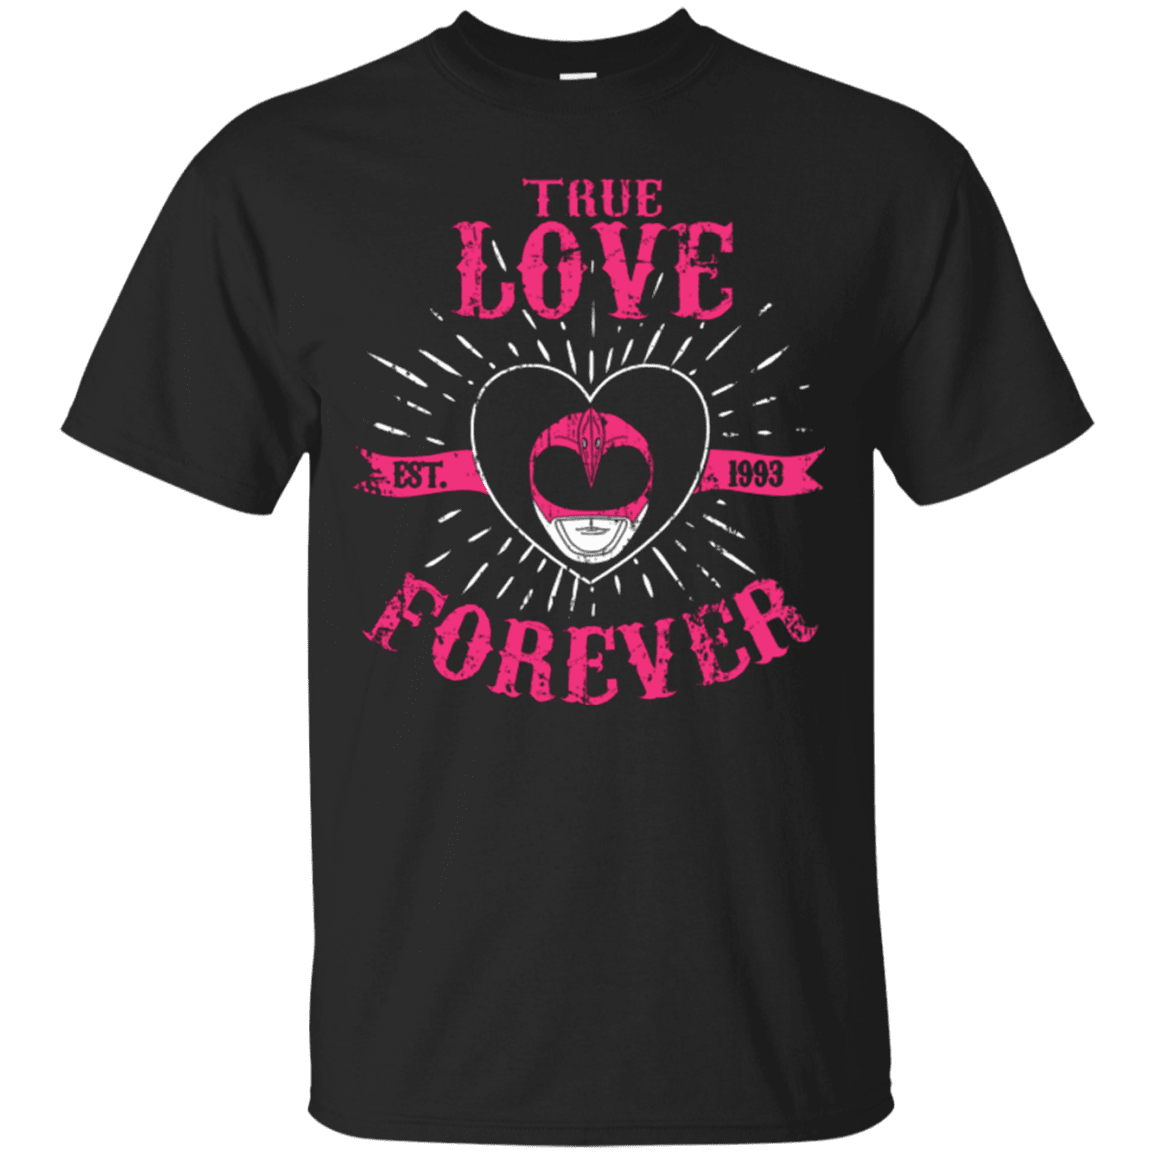 T-Shirts Black / Small True Love Forever Pink T-Shirt